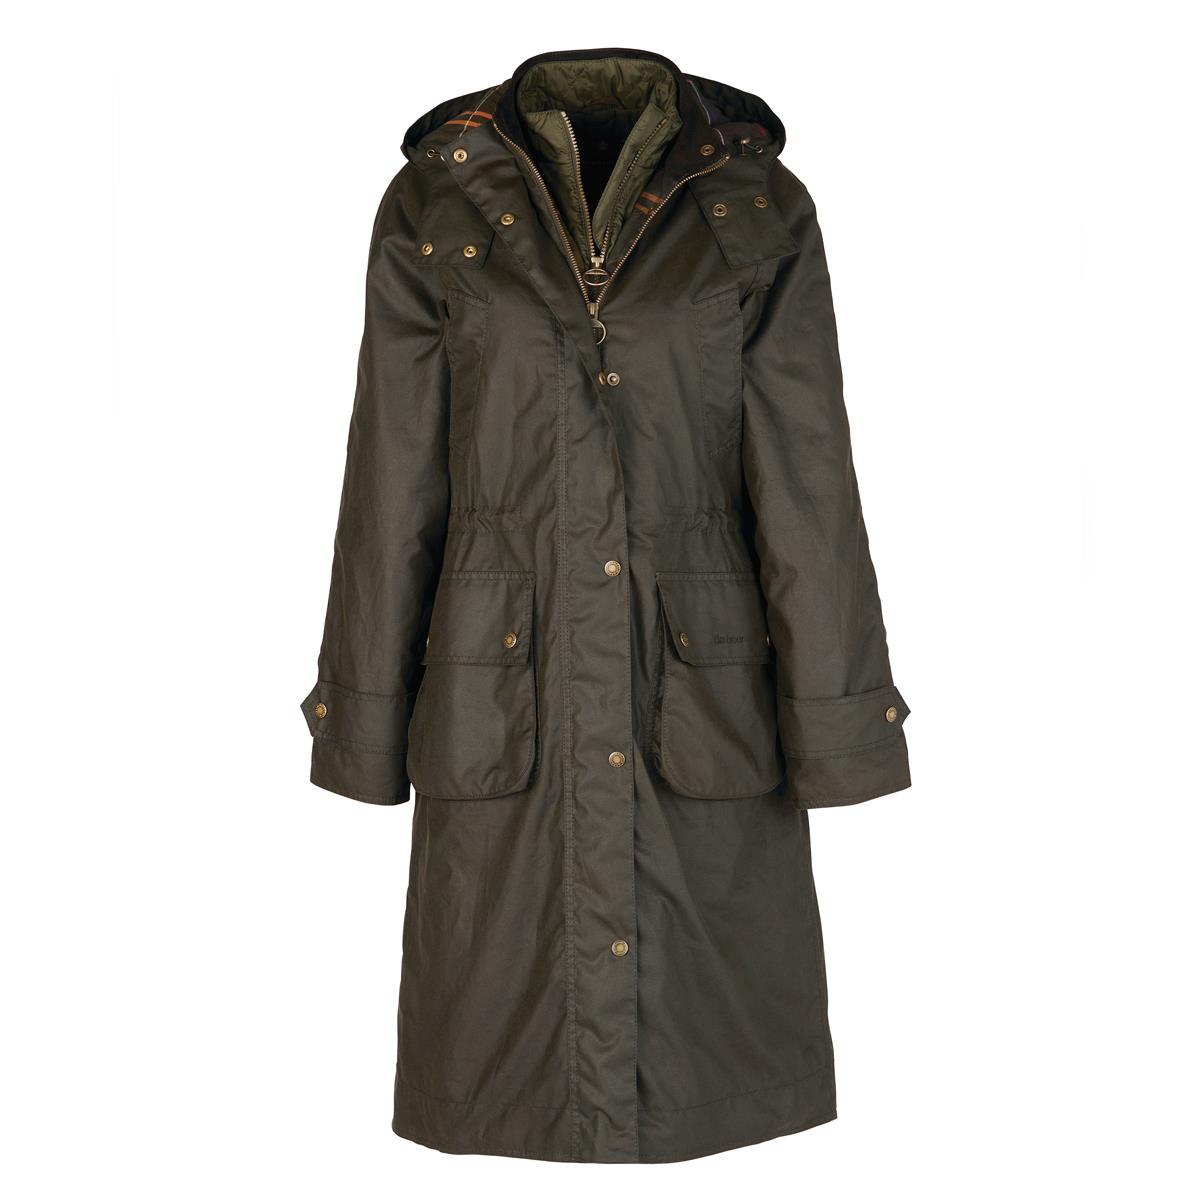 Is the Long Cannich Wax a variation of the classic barbour cannich wax jacket?